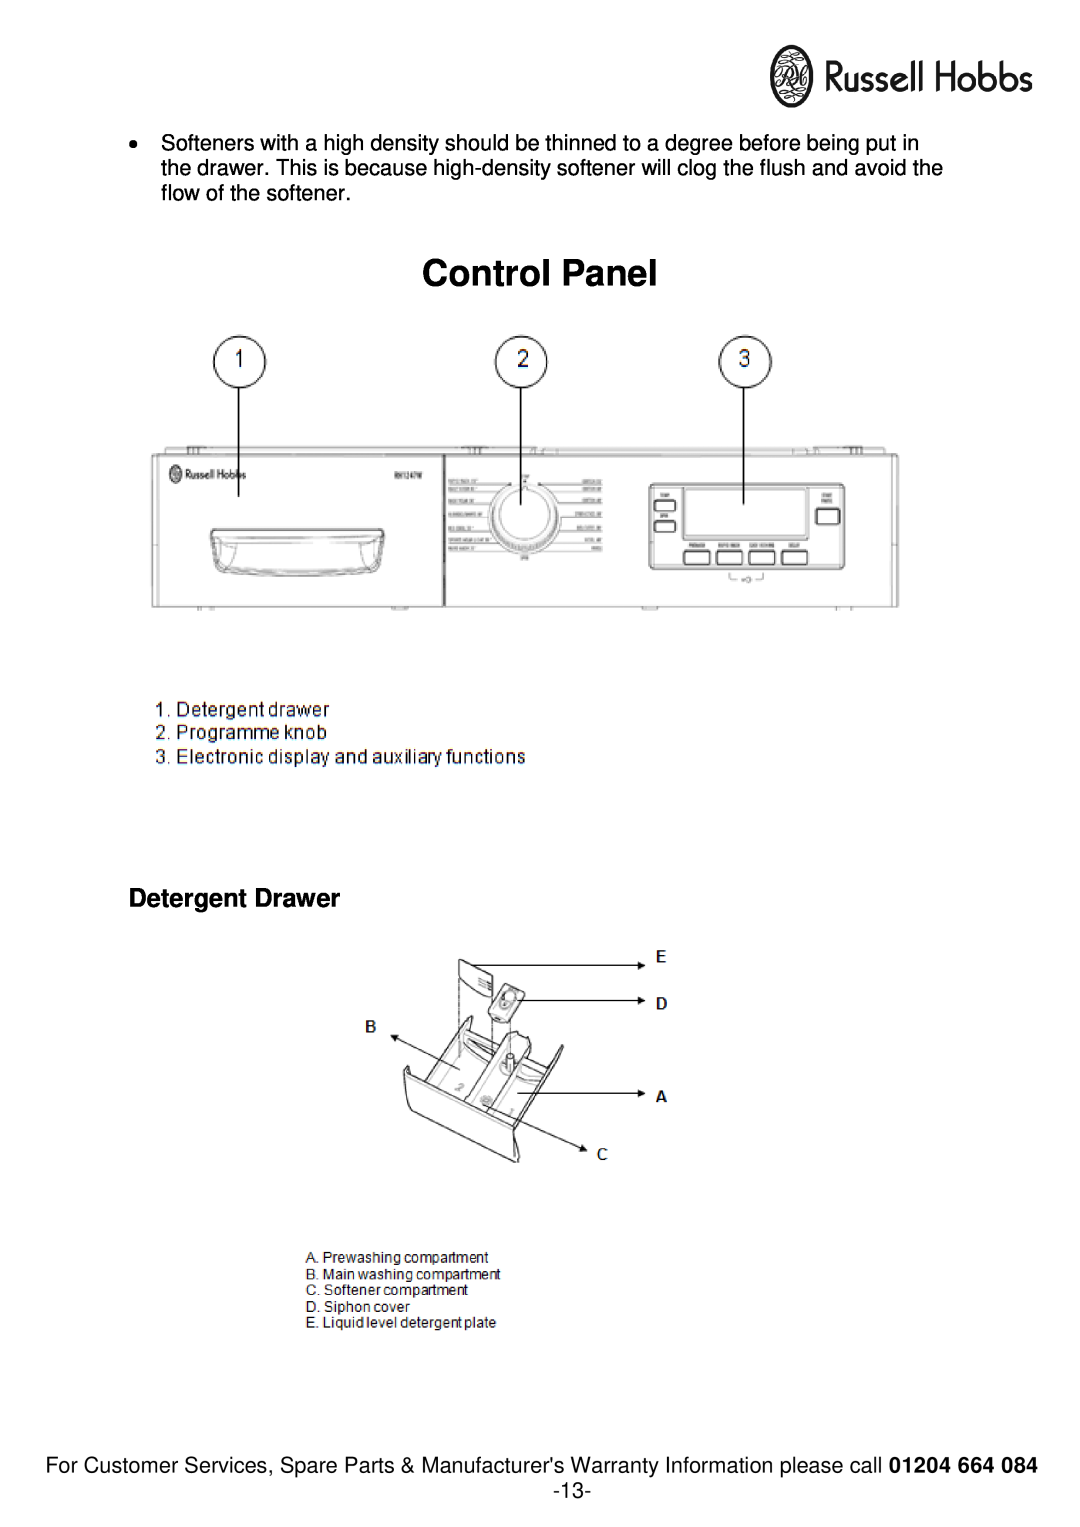 Russell Hobbs RH1261TW instruction manual Control Panel, Detergent Drawer 